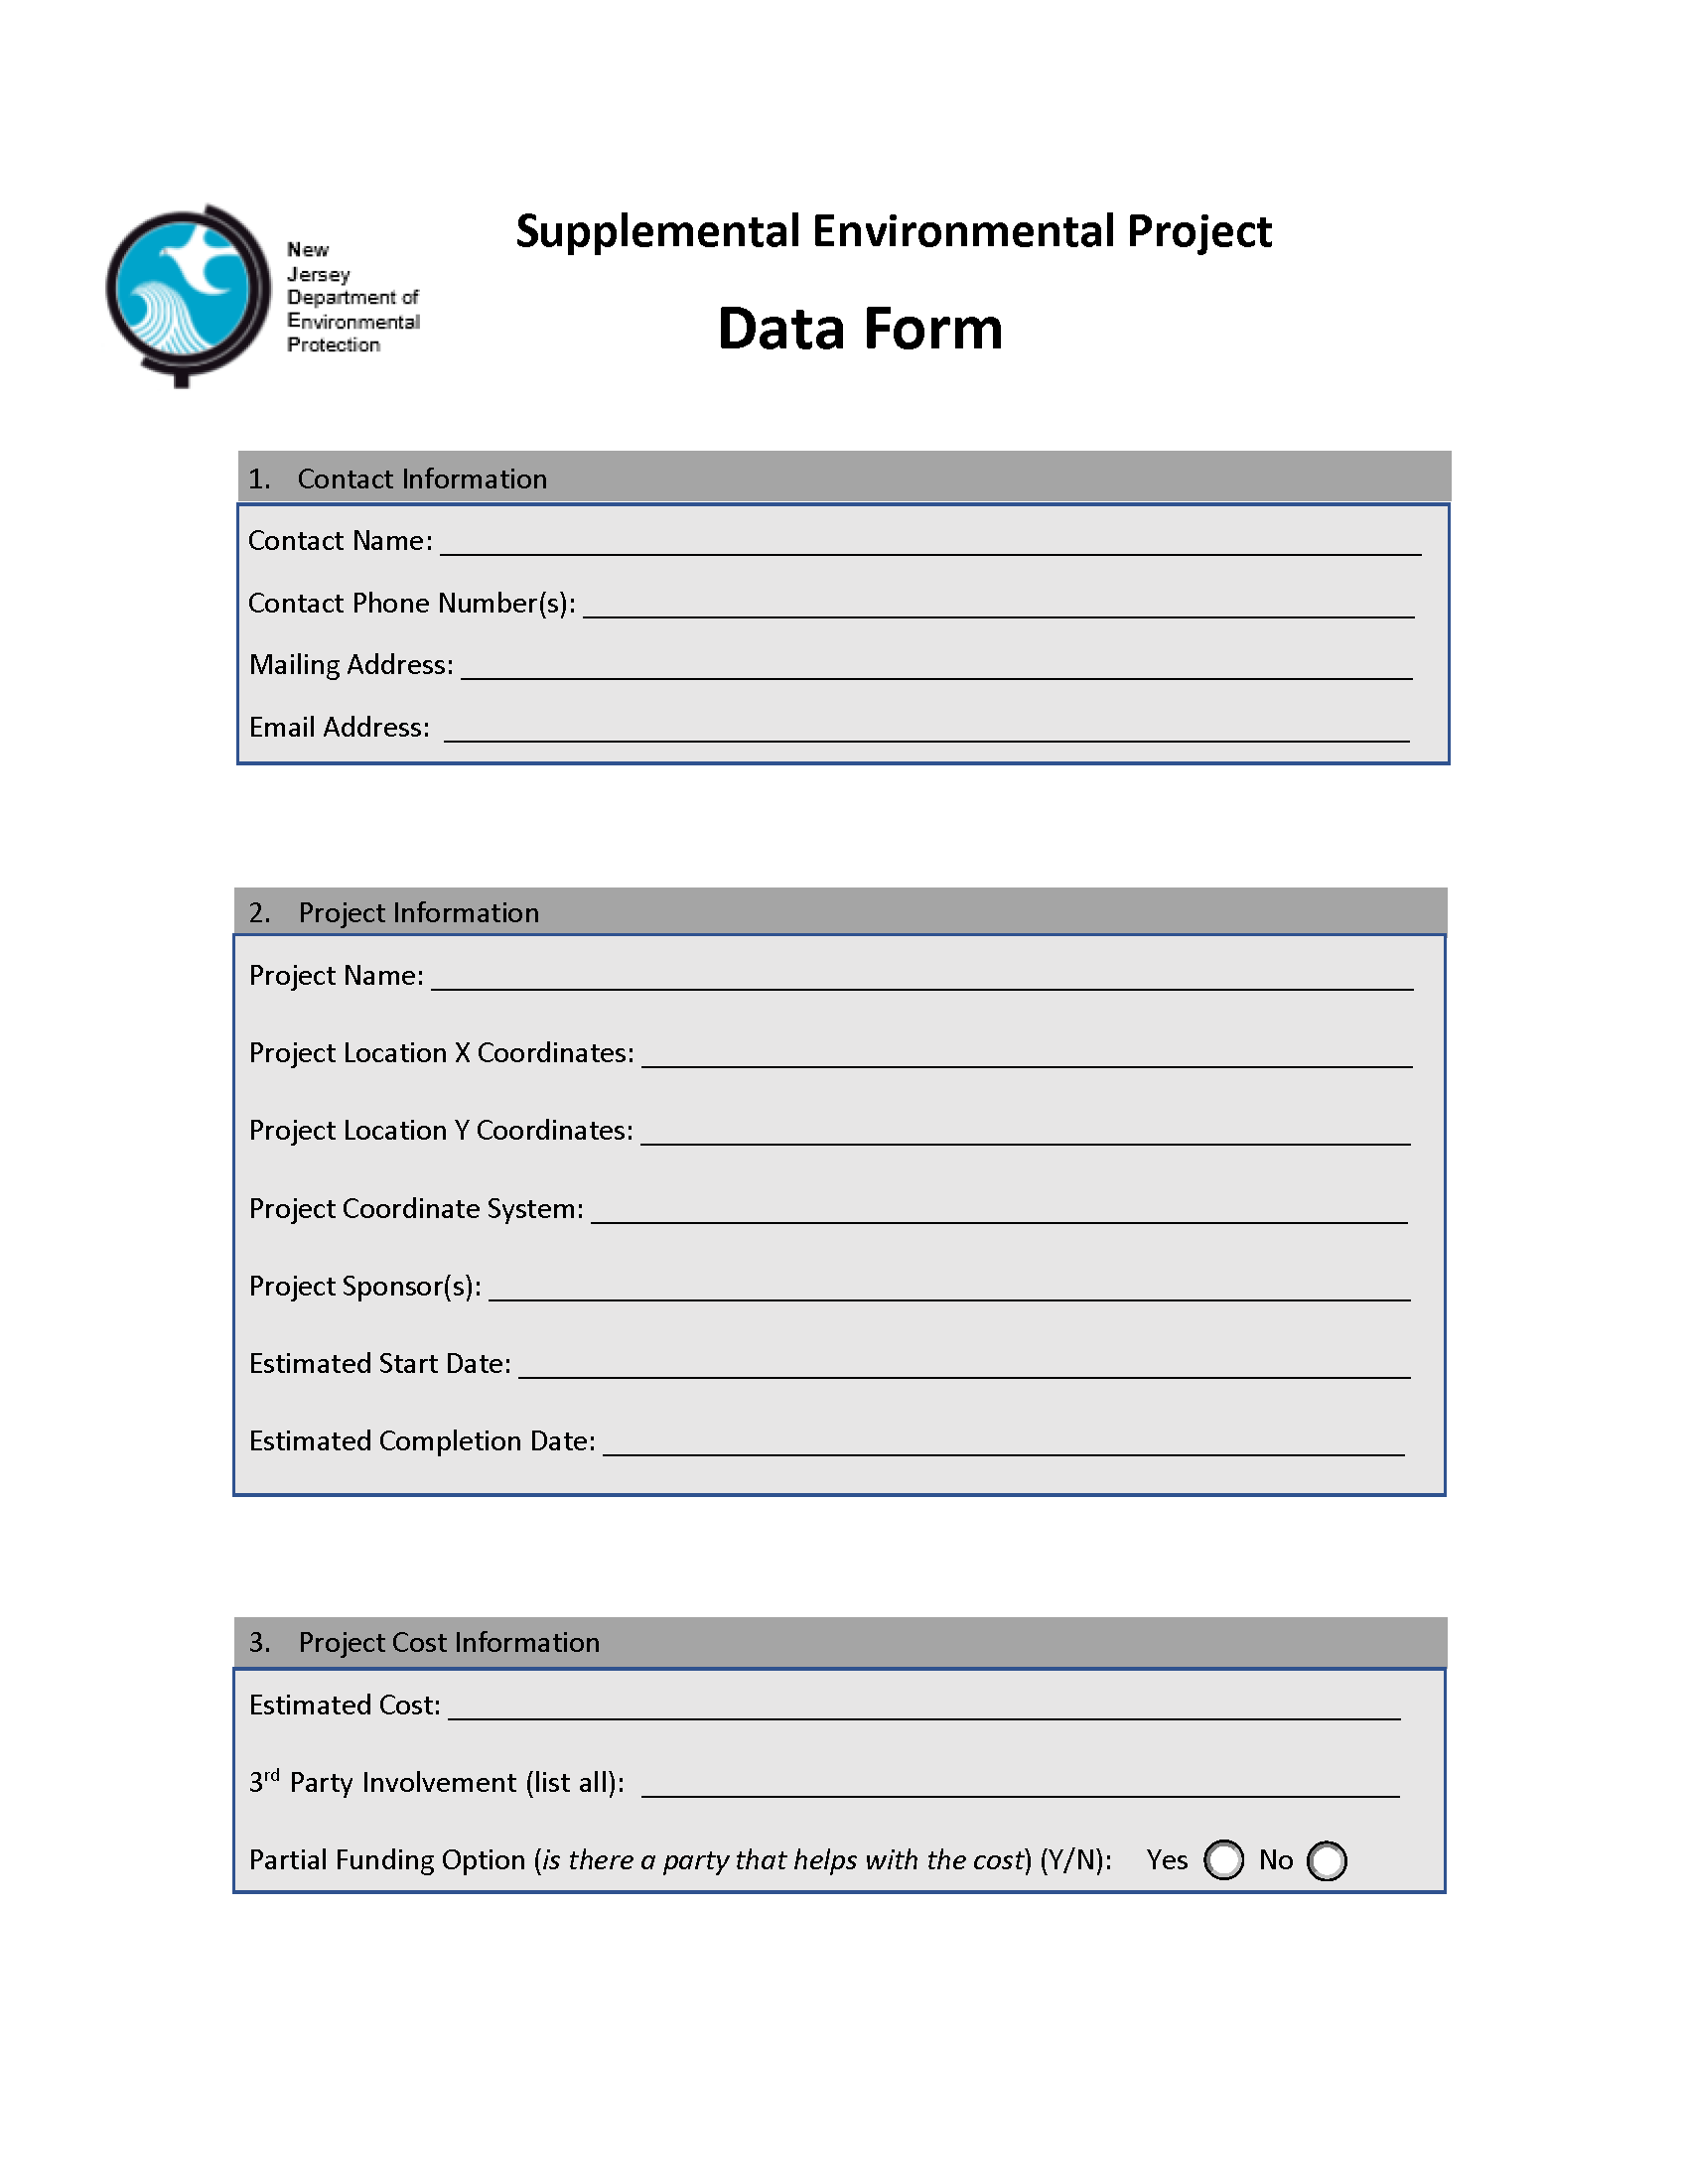 SEP Project Form